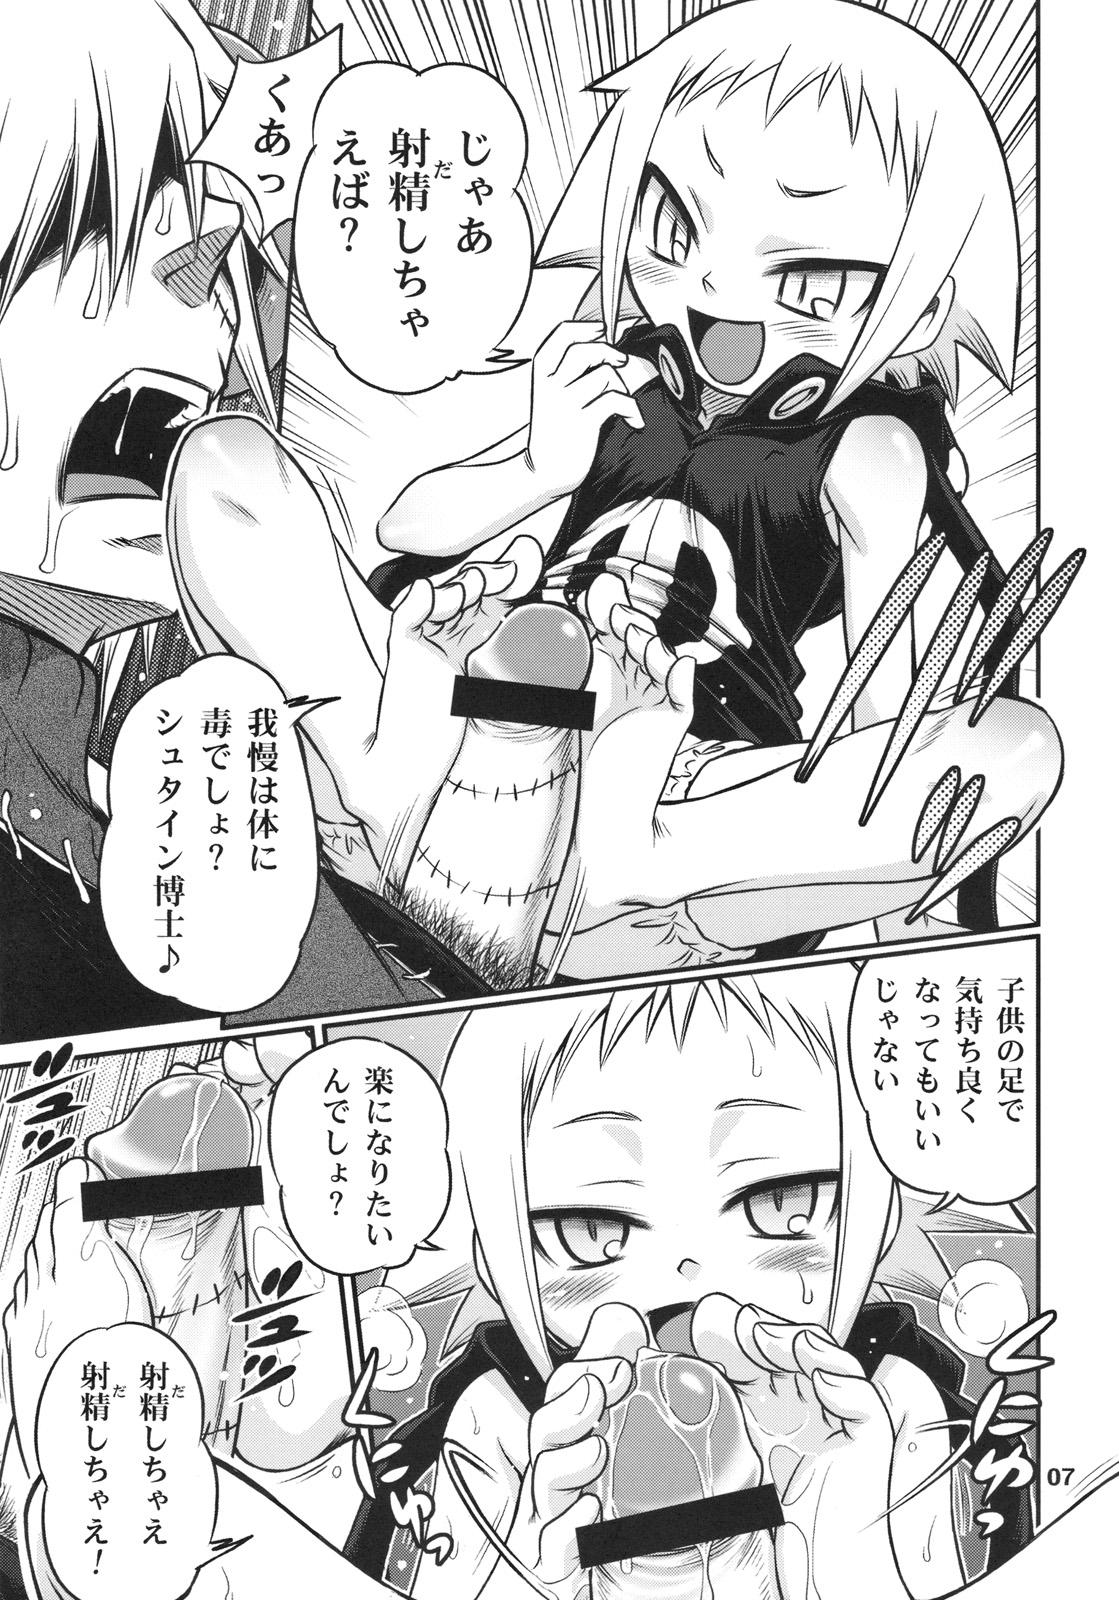 Groupfuck Medhu-tan - Soul eater Reversecowgirl - Page 6